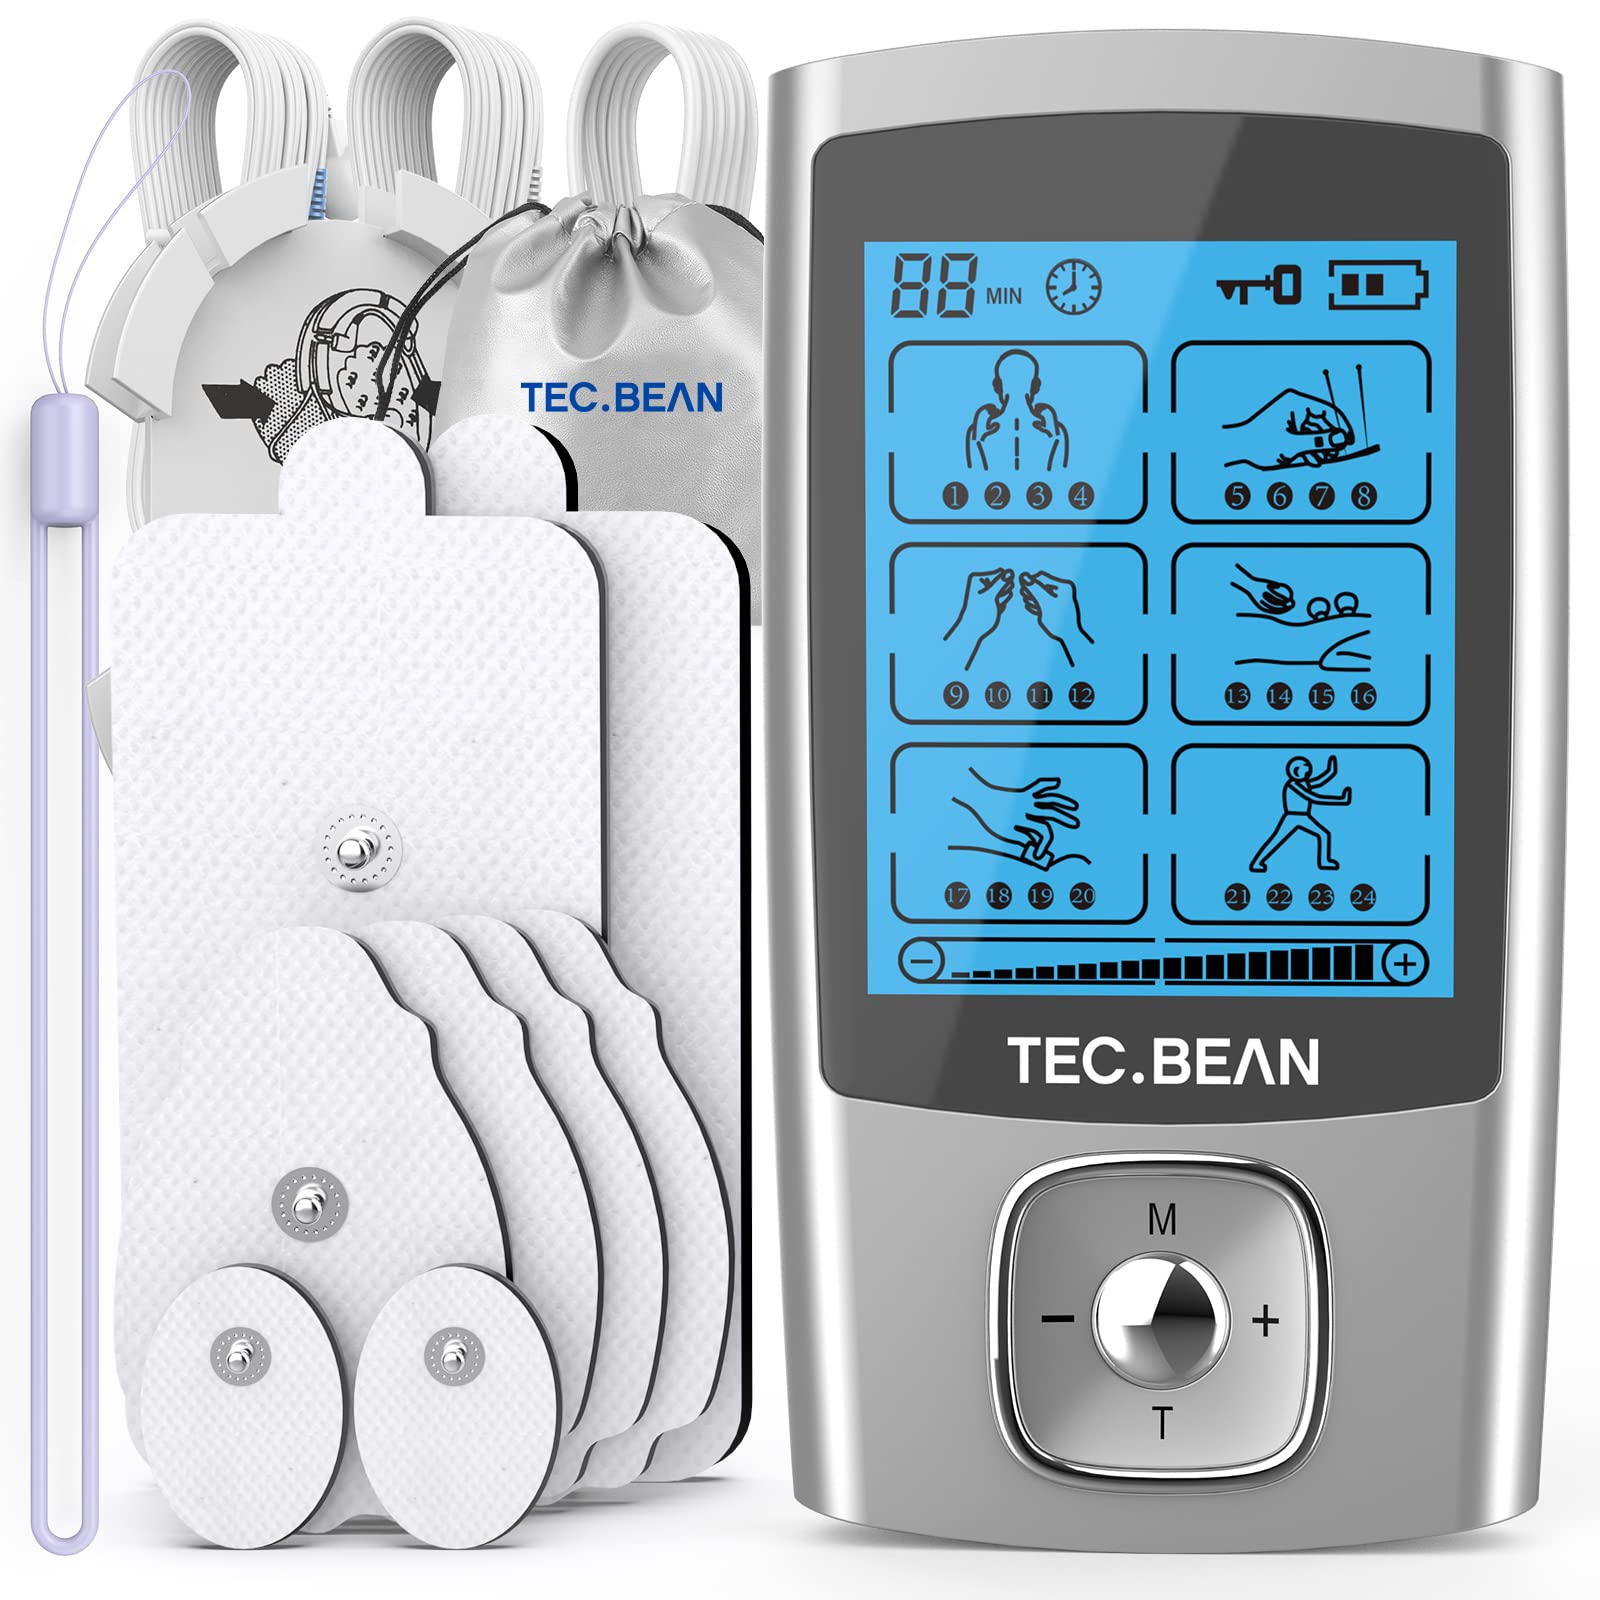 Rechargeable TENS Unit Muscle Stimulator, Physical Therapy